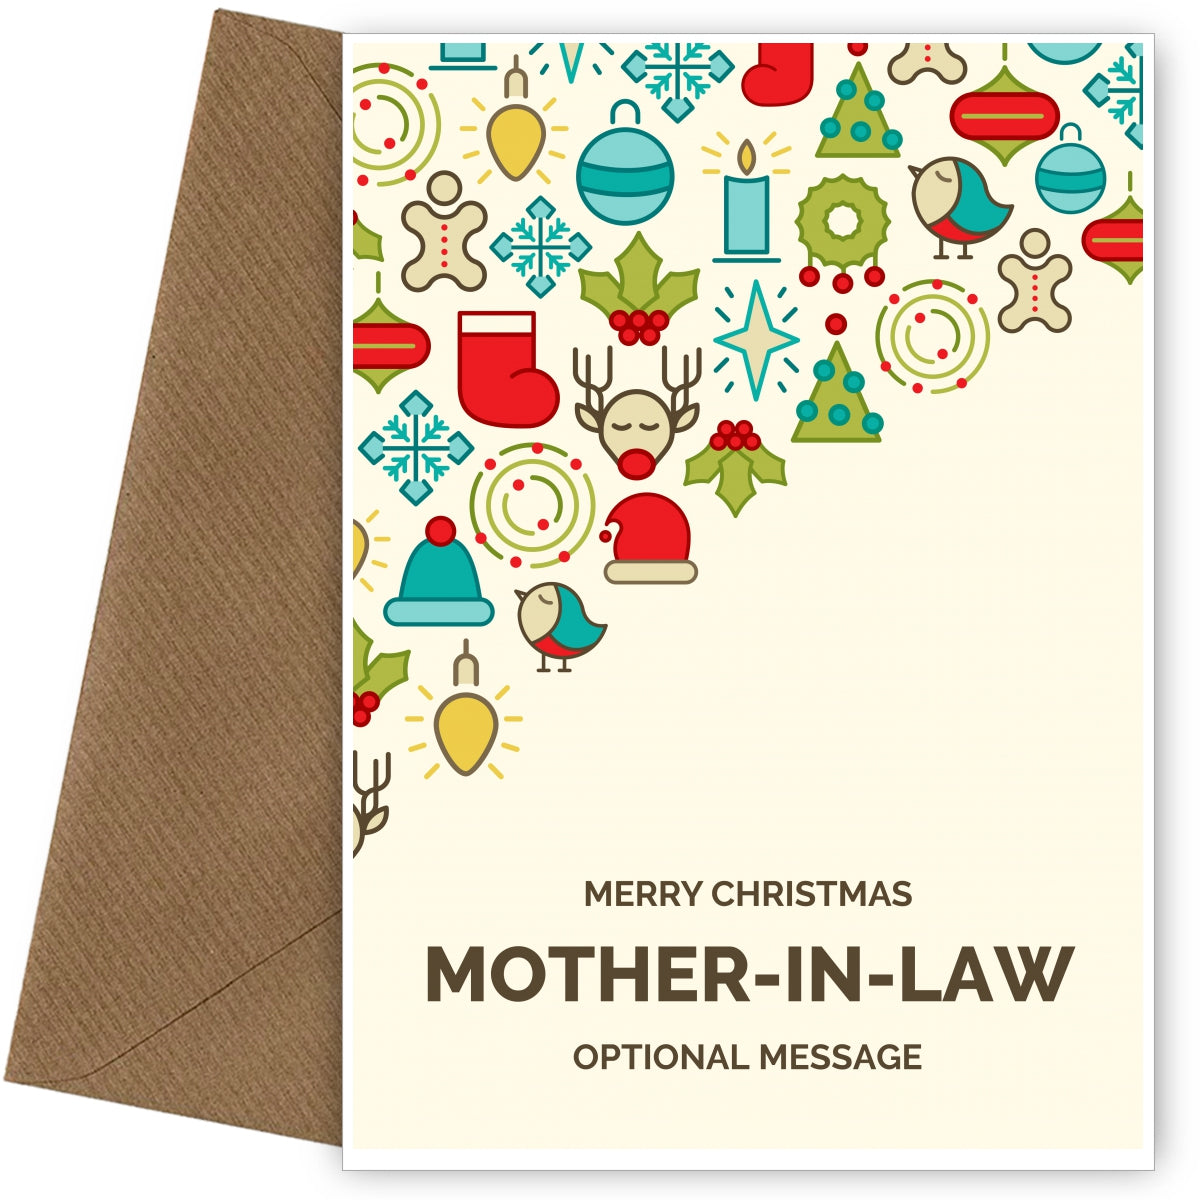 Merry Christmas Card for Mother-in-law - Christmas Icons